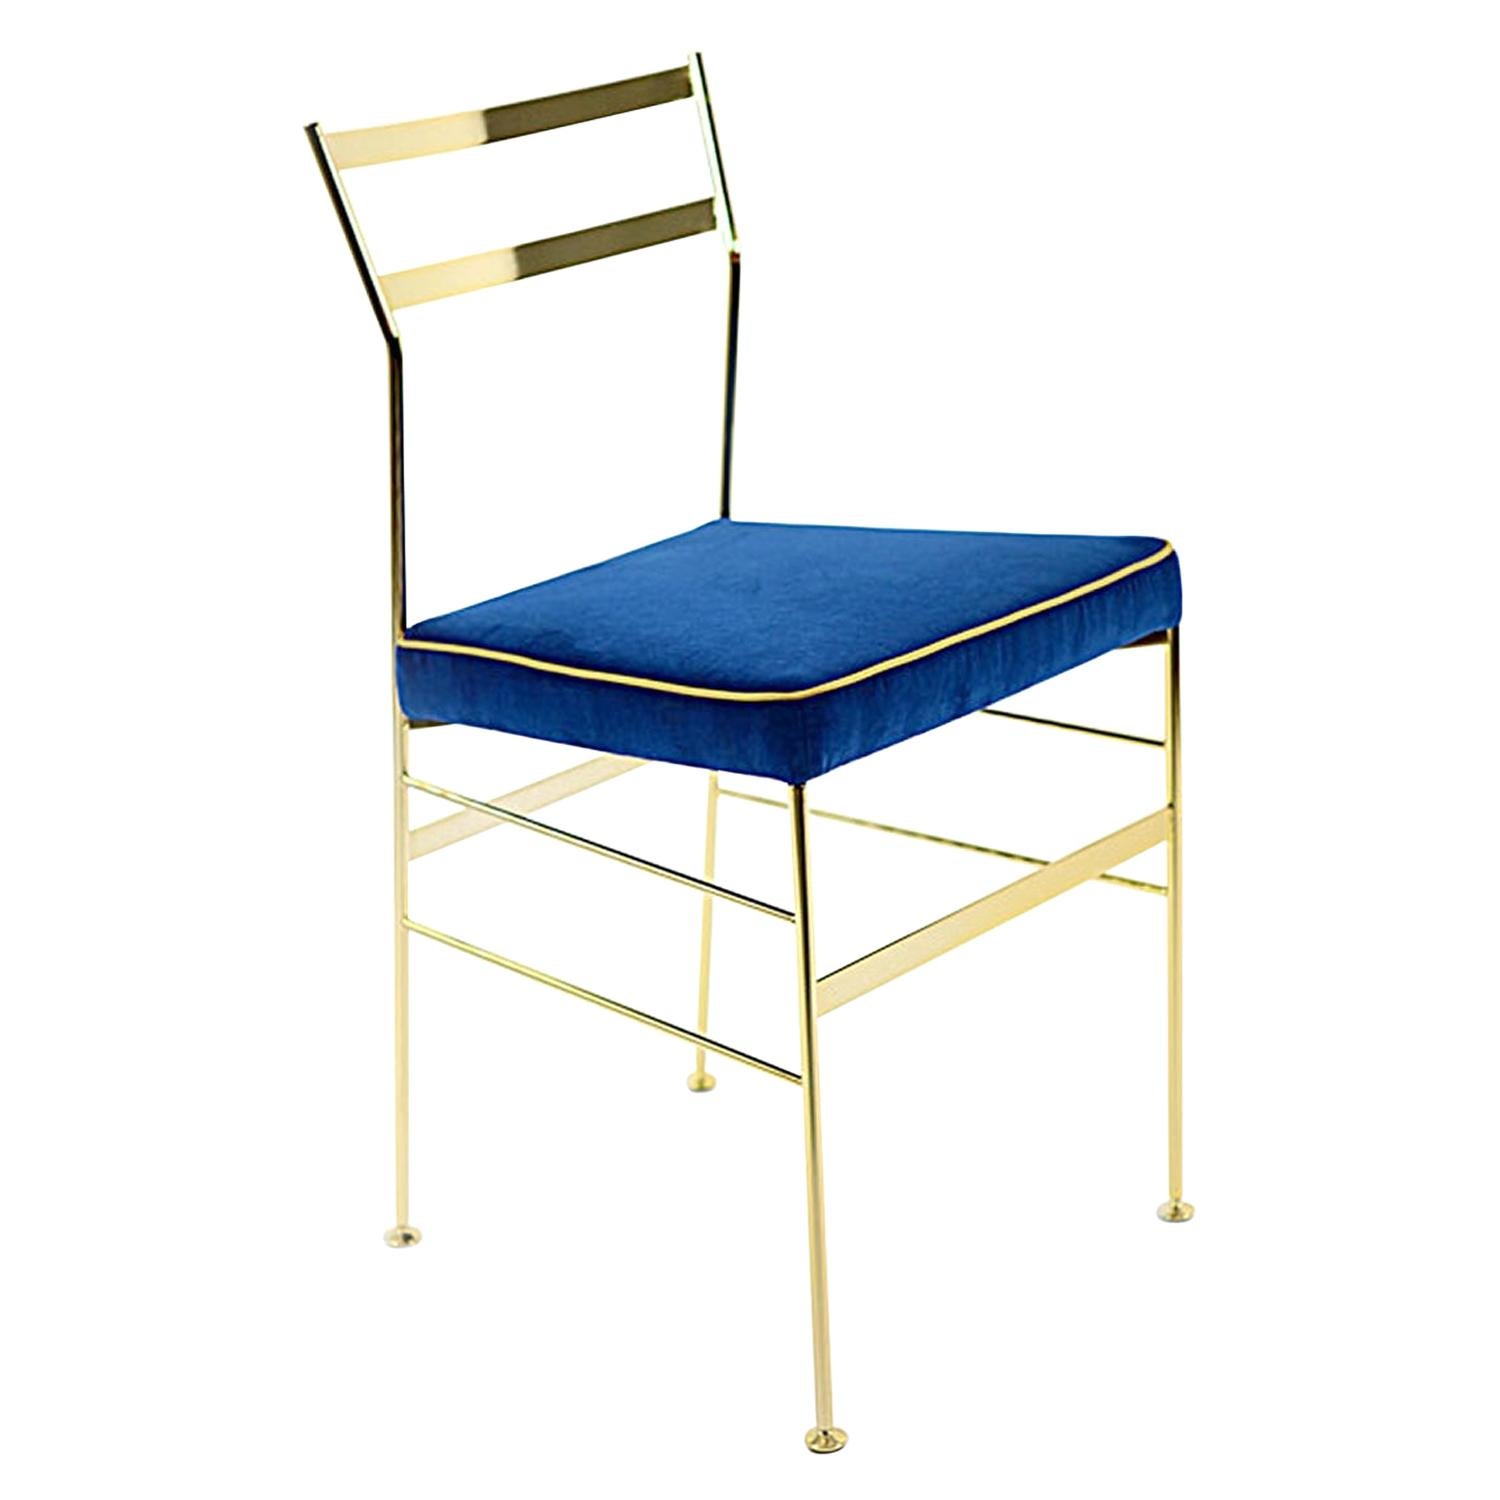 In Stock in Los Angeles, Velvet Dining Chair Blue, by Paolo Calcagni